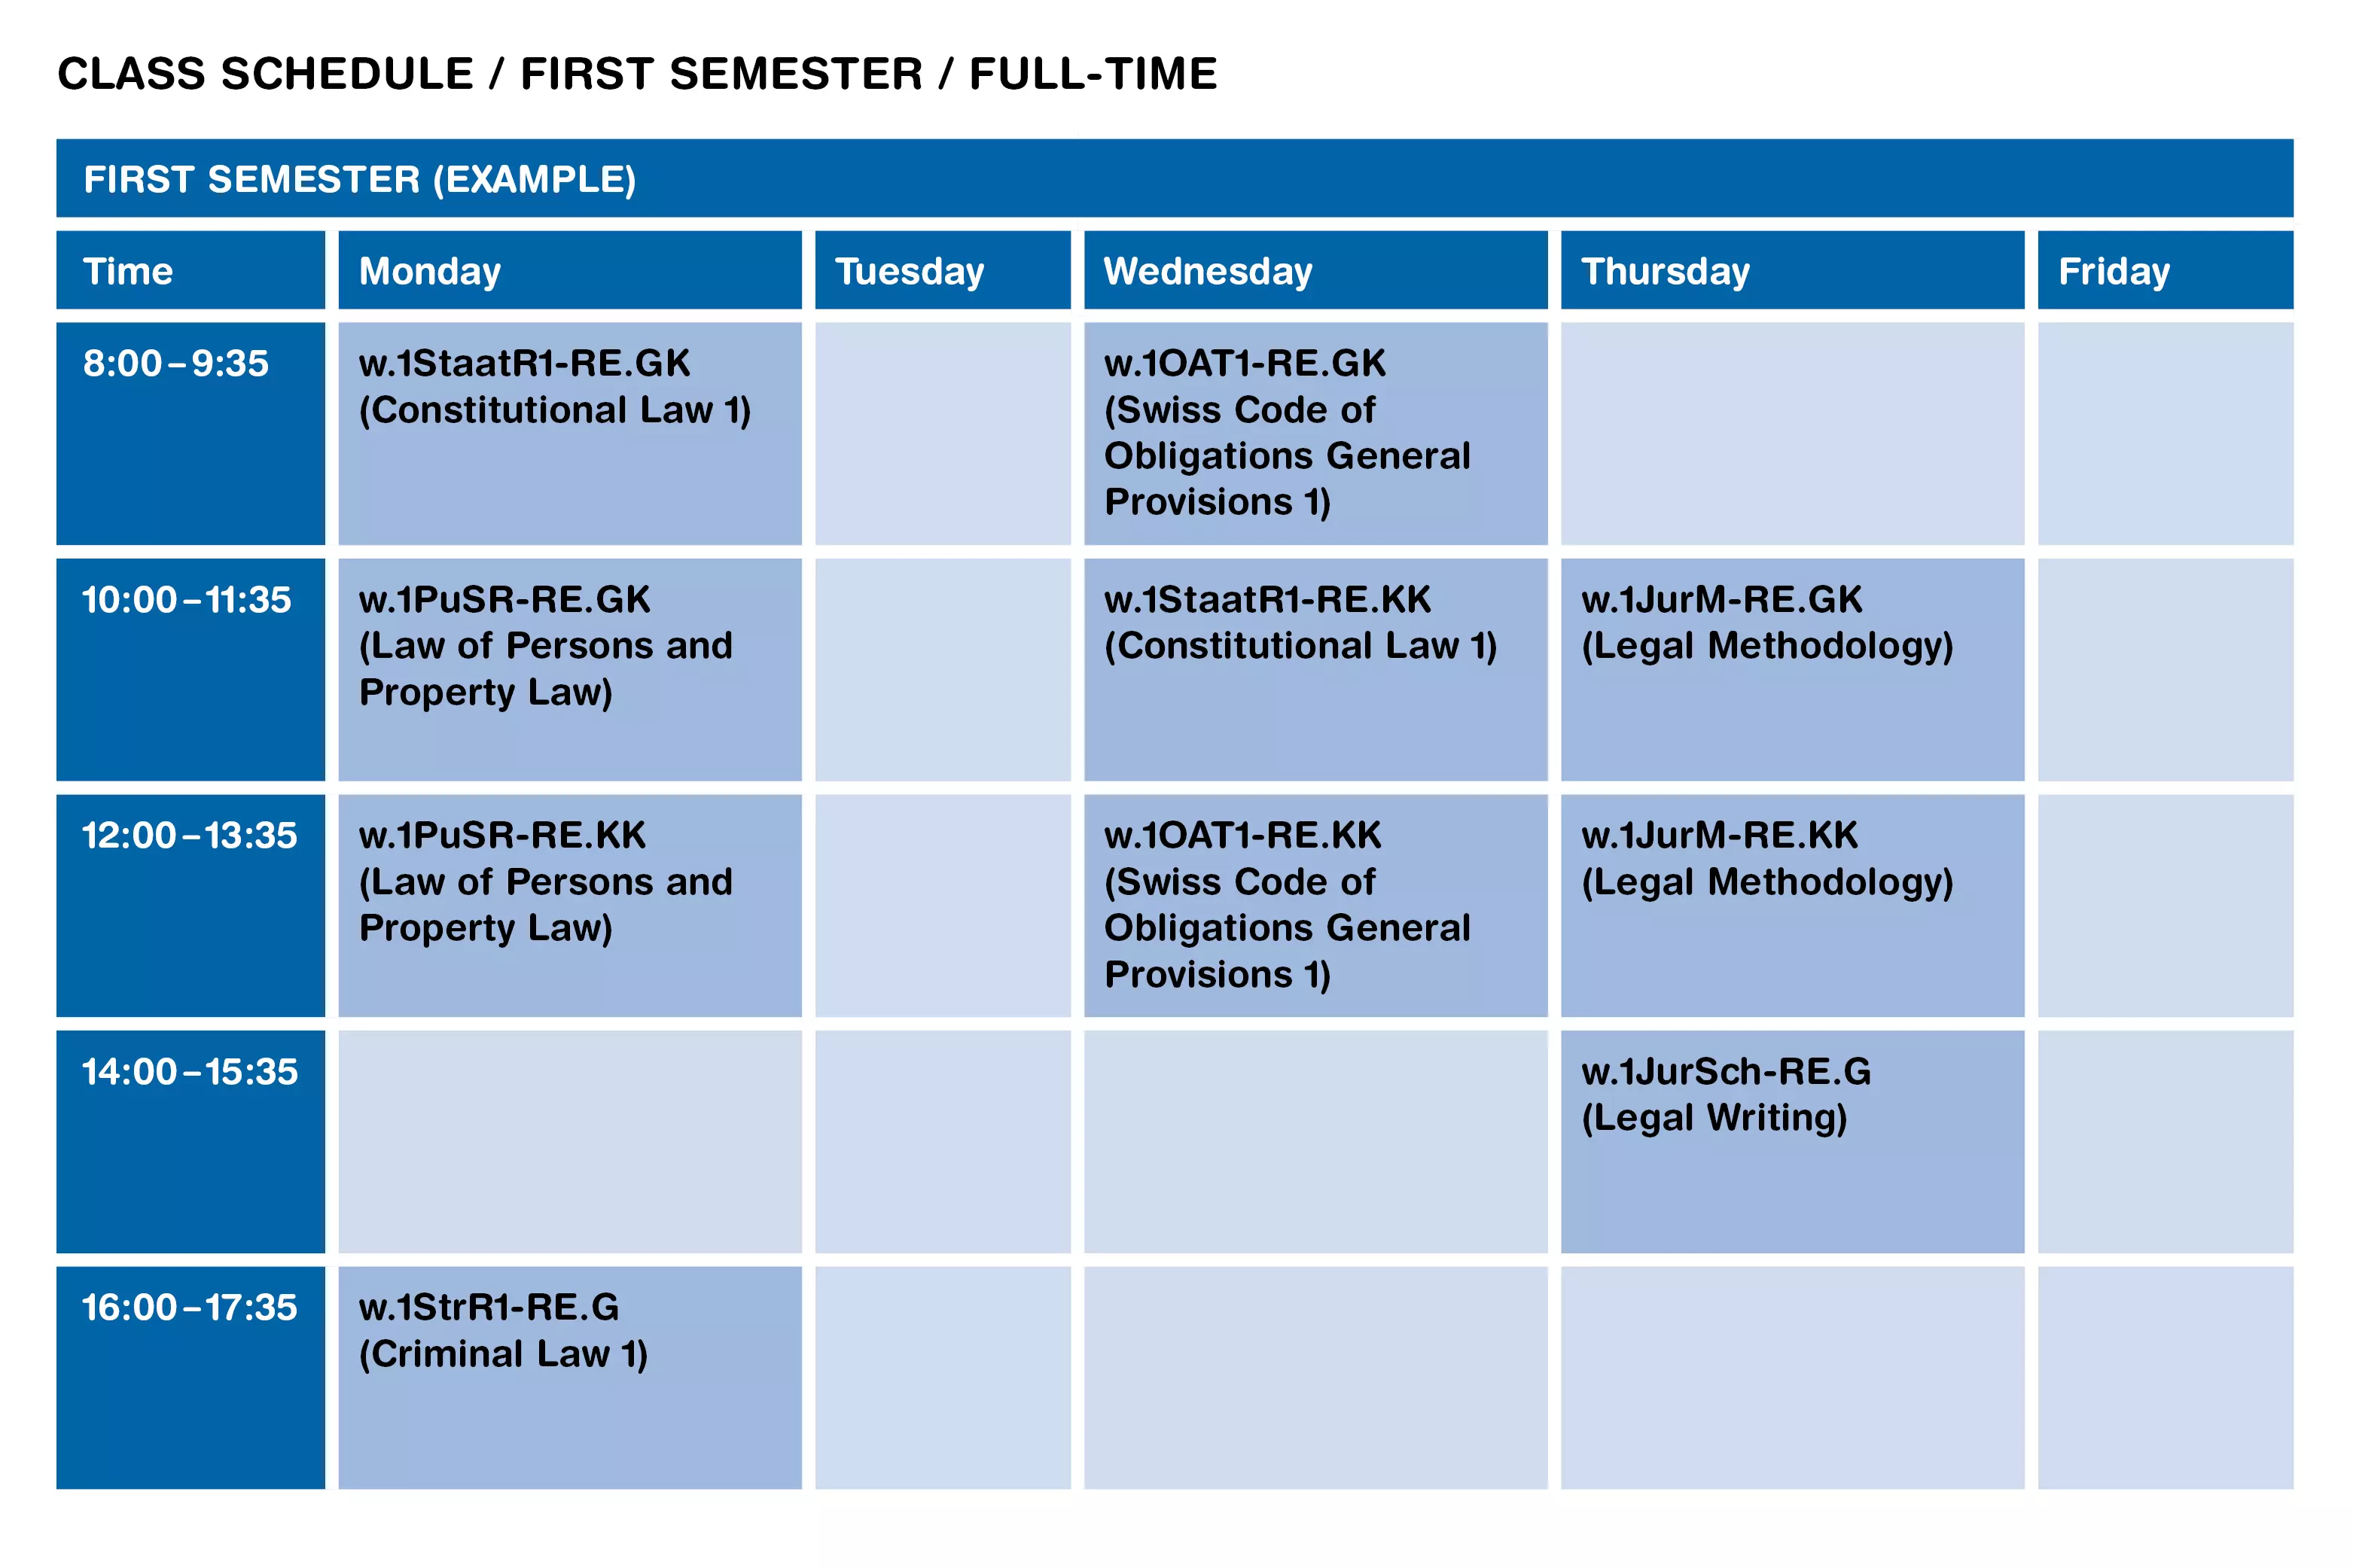 Example Schedule Full-time Applied Law